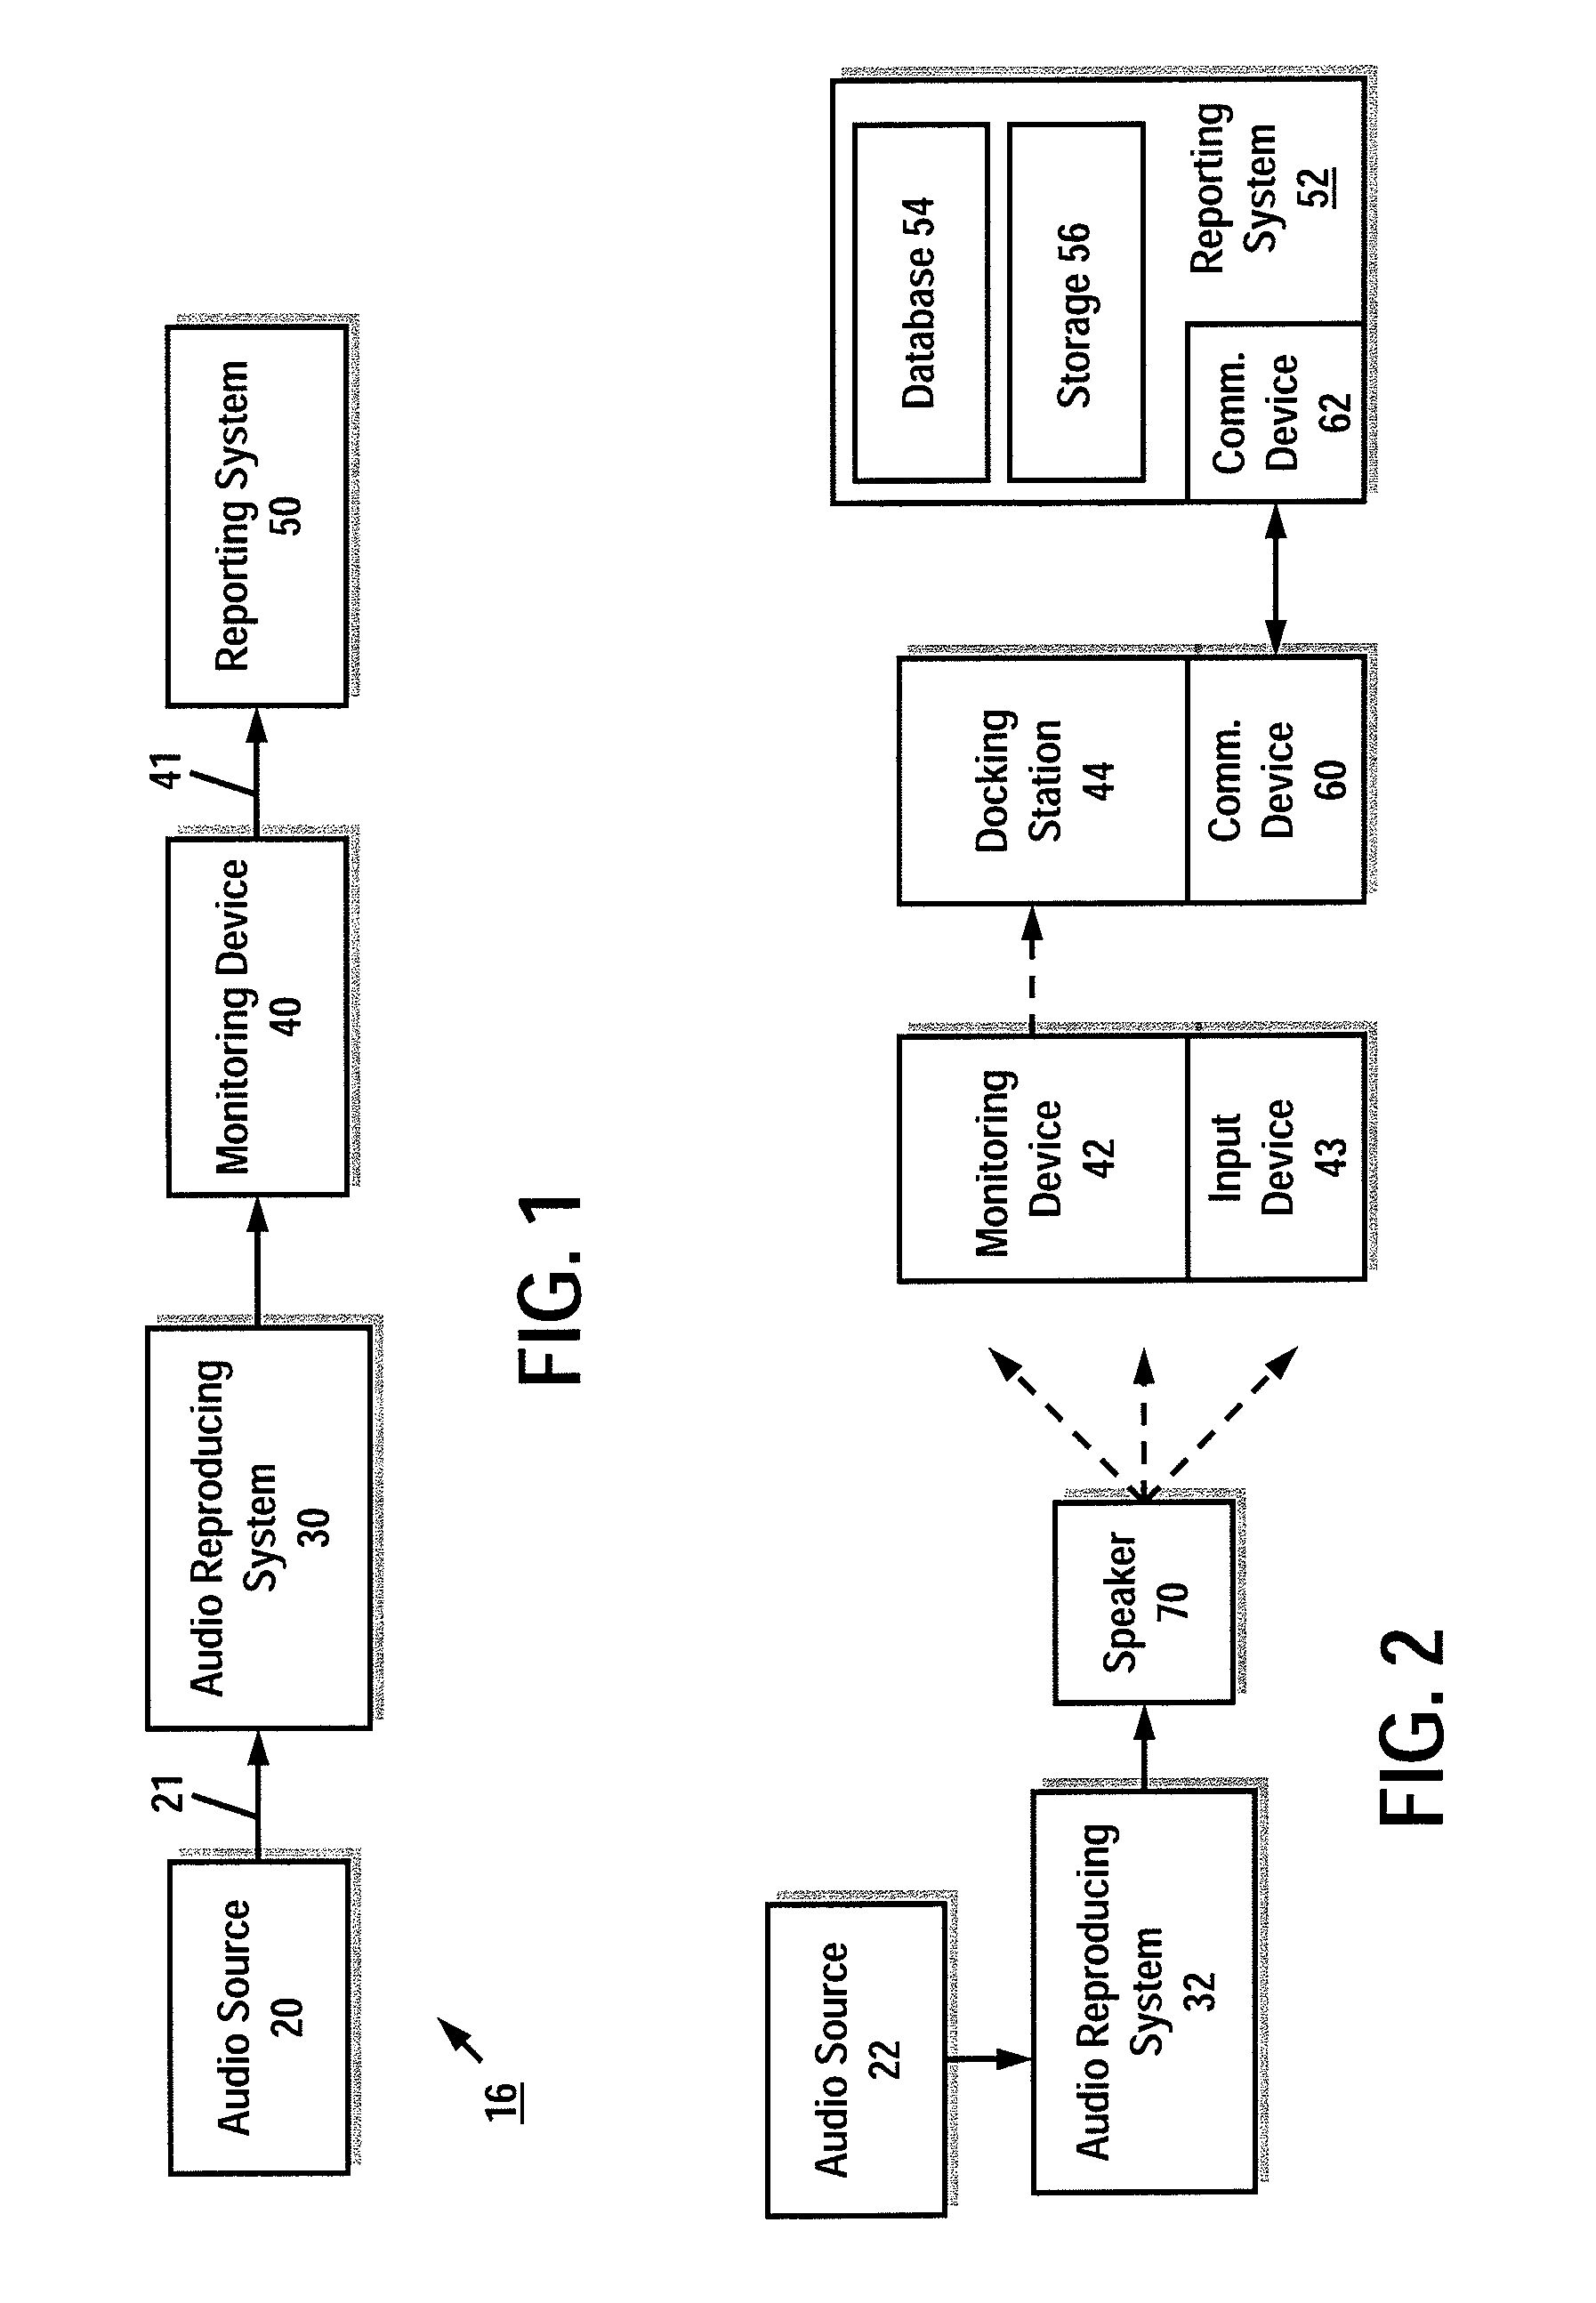 Activating functions in processing devices using encoded audio and detecting audio signatures